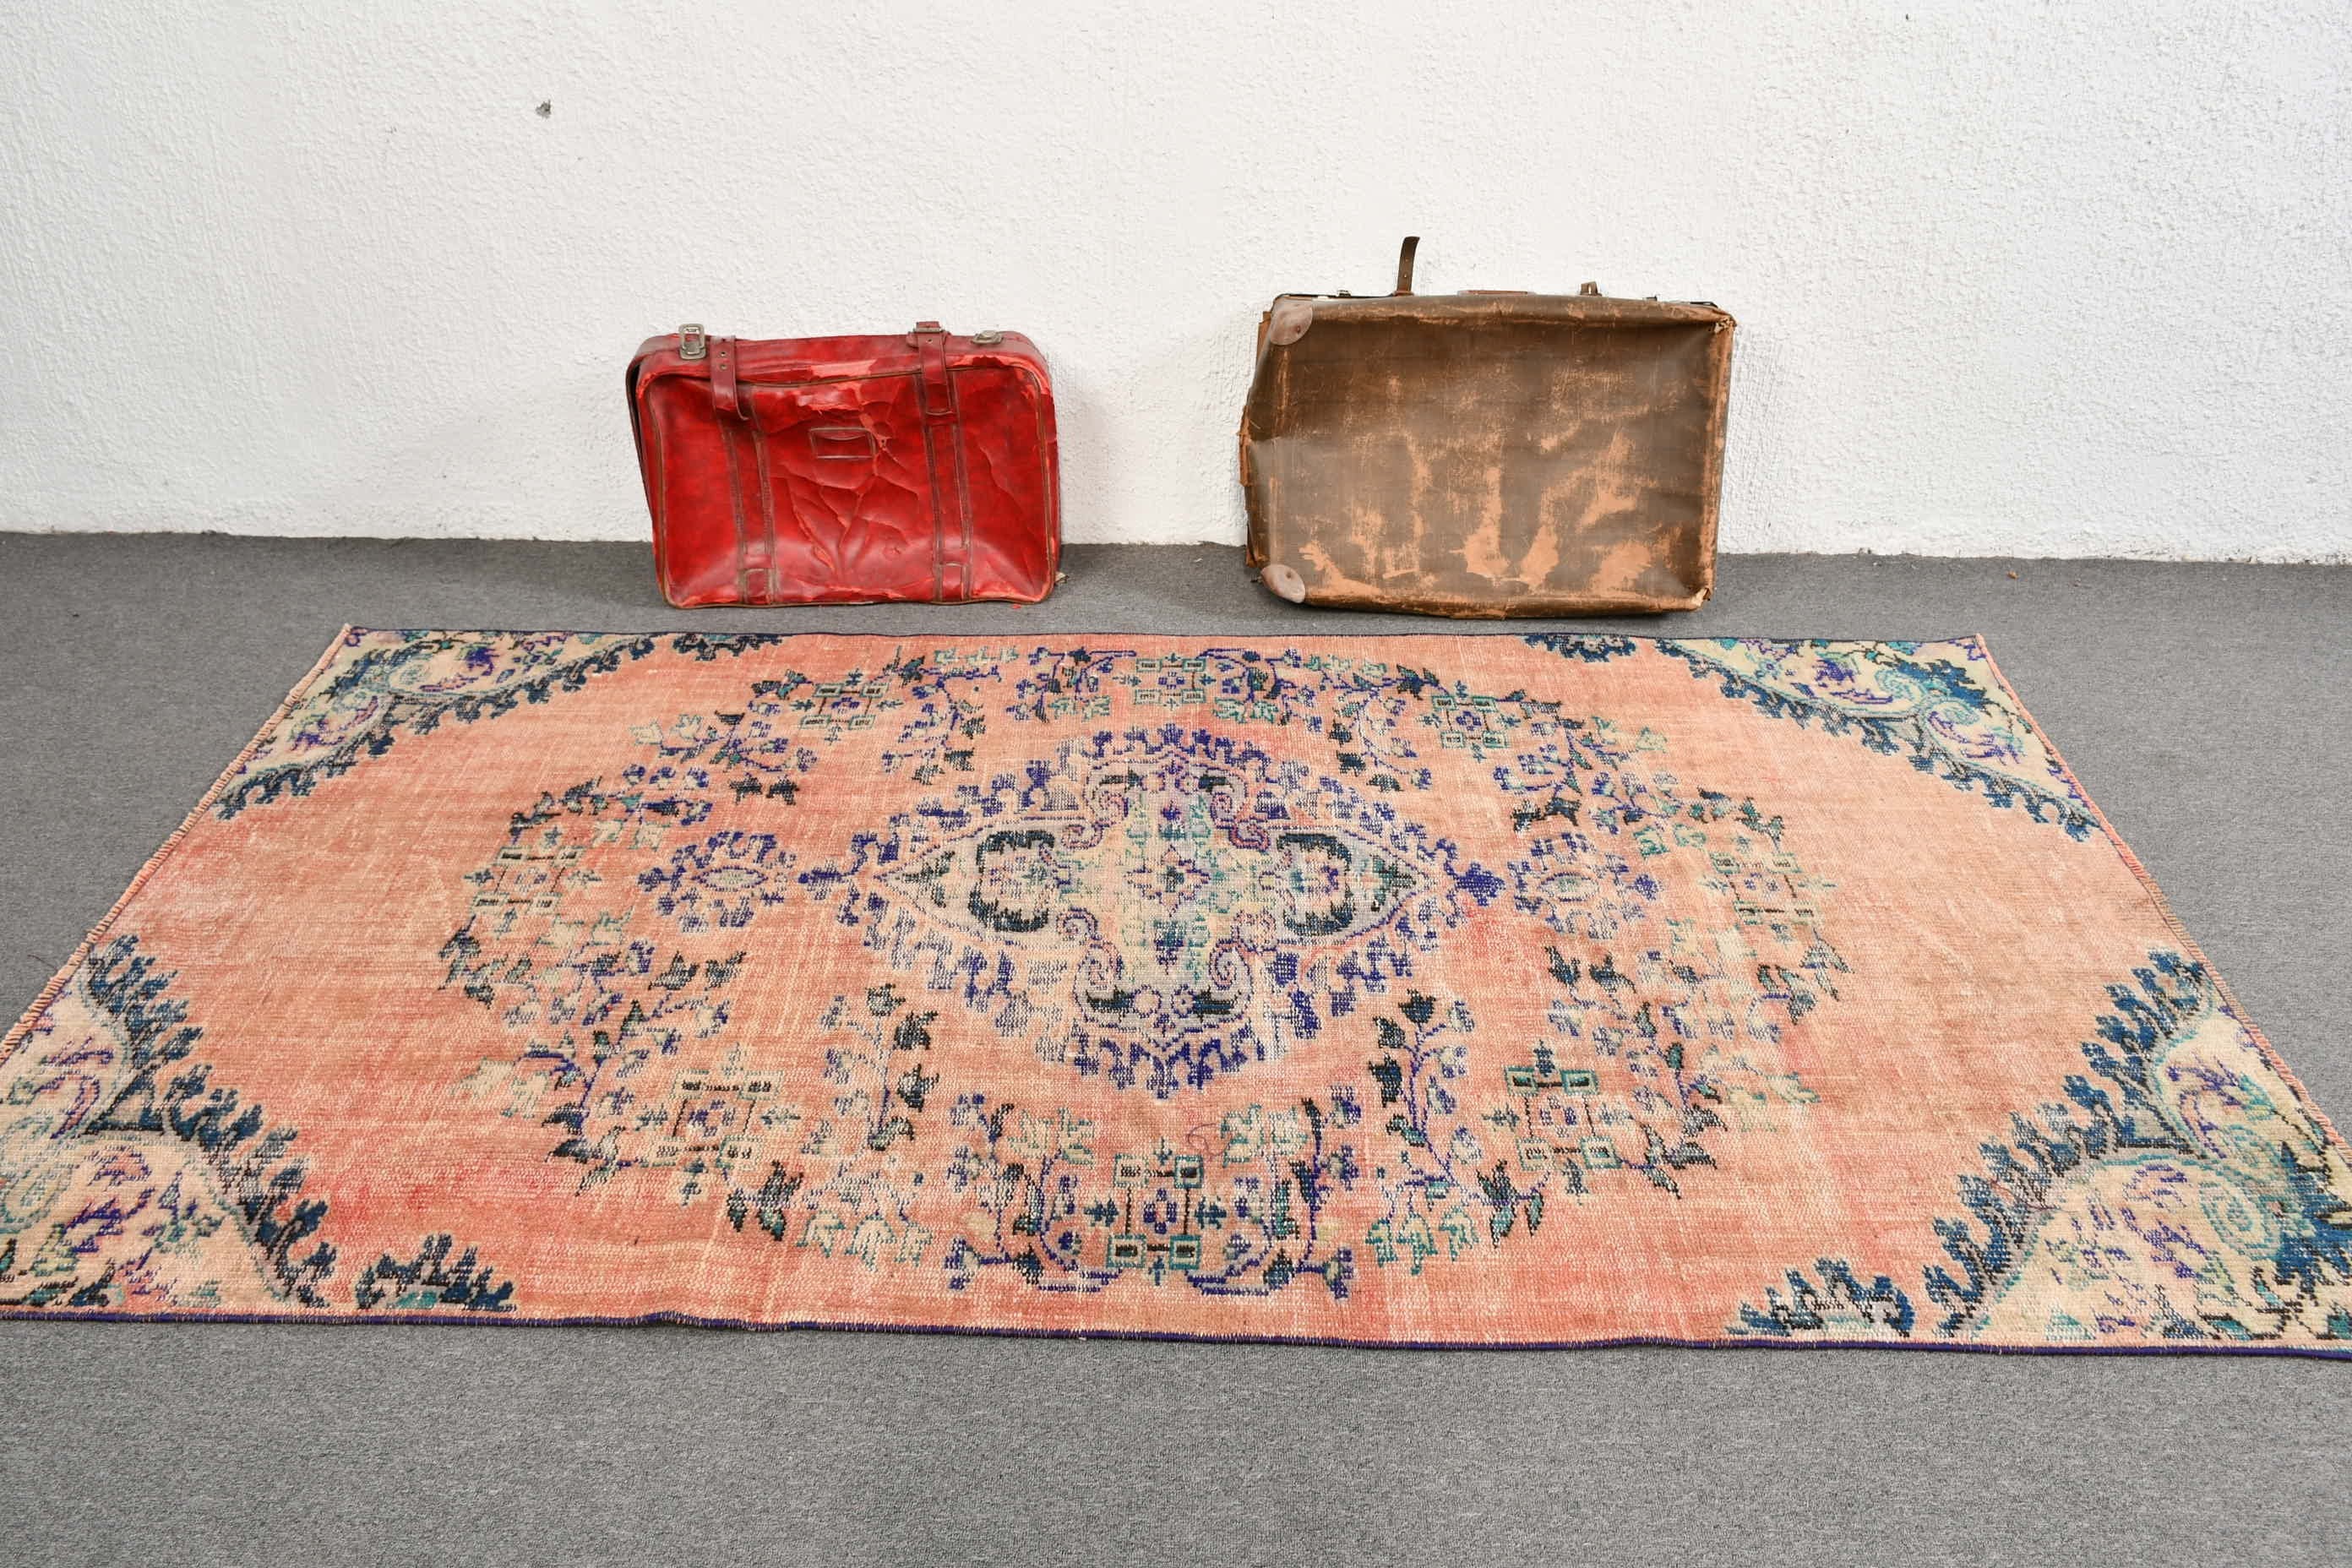 Vintage Rugs, Turkish Rugs, Floor Rug, Kitchen Rug, Rugs for Bedroom, Red Home Decor Rug, Antique Rug, Bright Rug, 4.5x8.3 ft Area Rugs